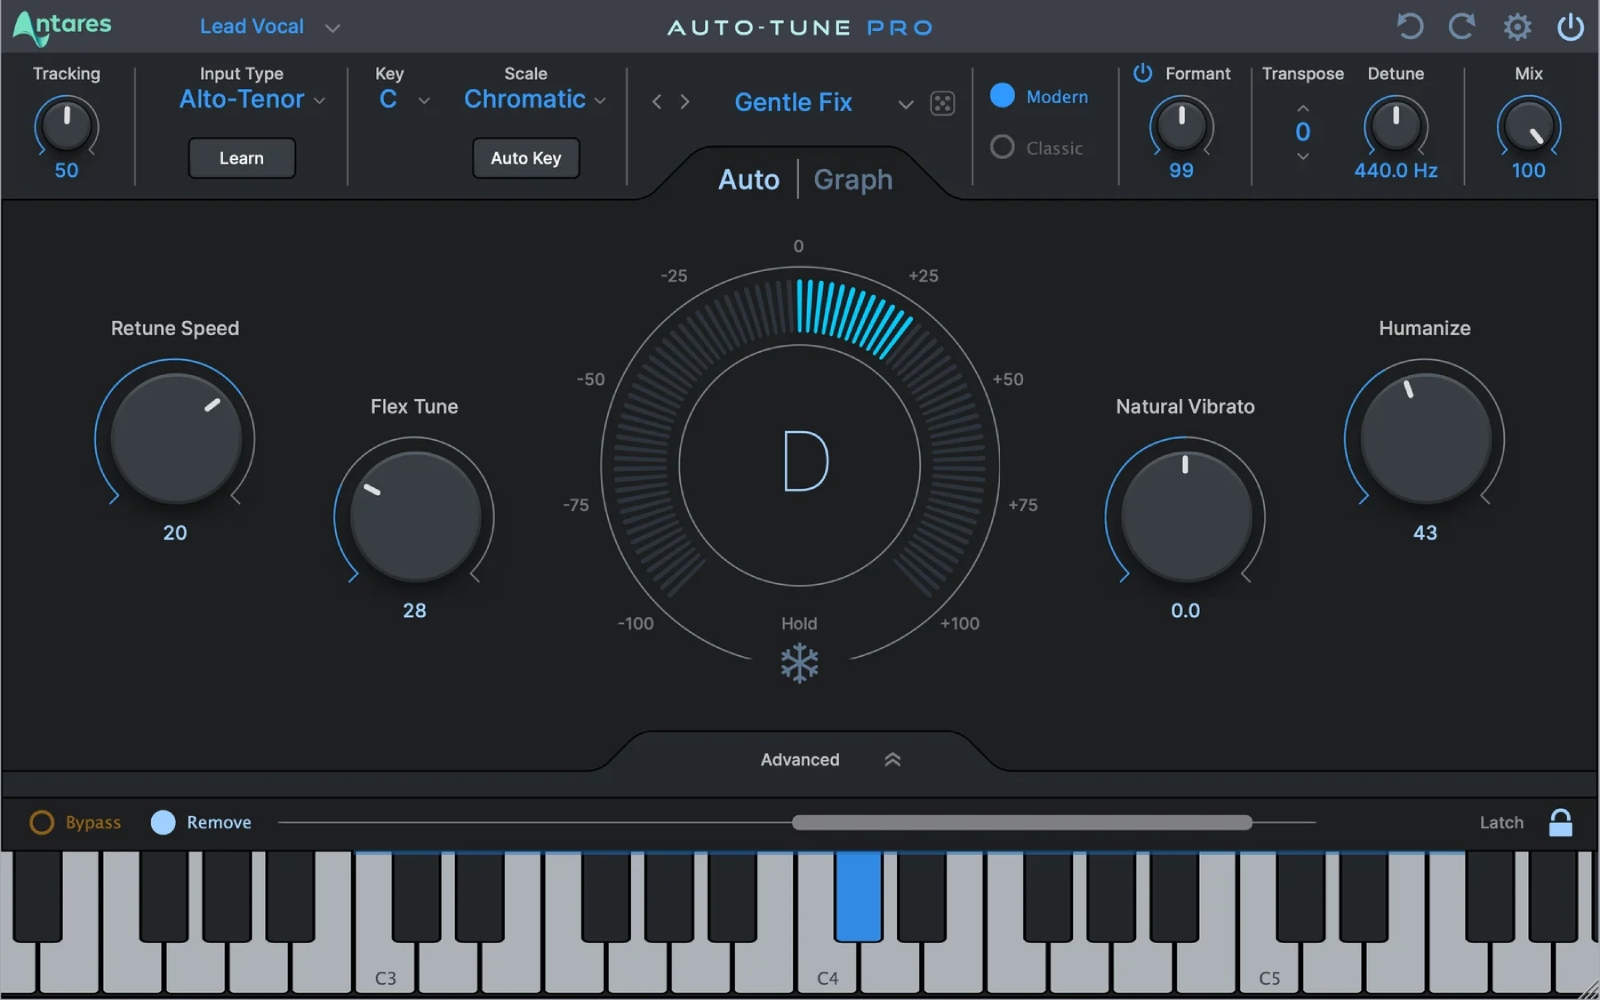 ANTARES AUTO-TUNE UNLIMITED 12 MONTHS